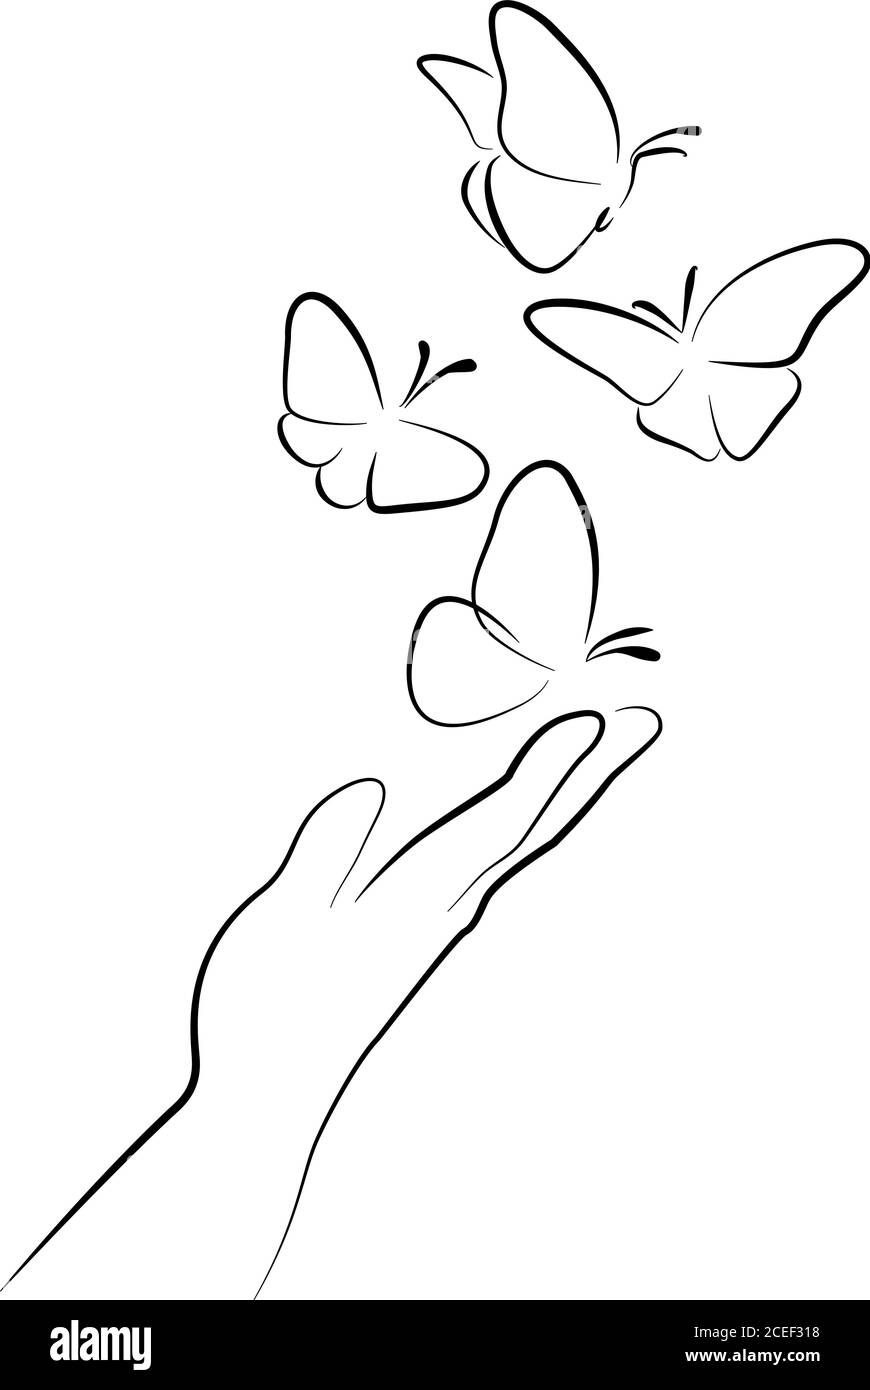 Hand with butterfly on finger. Line art drawing style with different thickness. Black linear sketch isolated on white background. Vector illustration Stock Vector